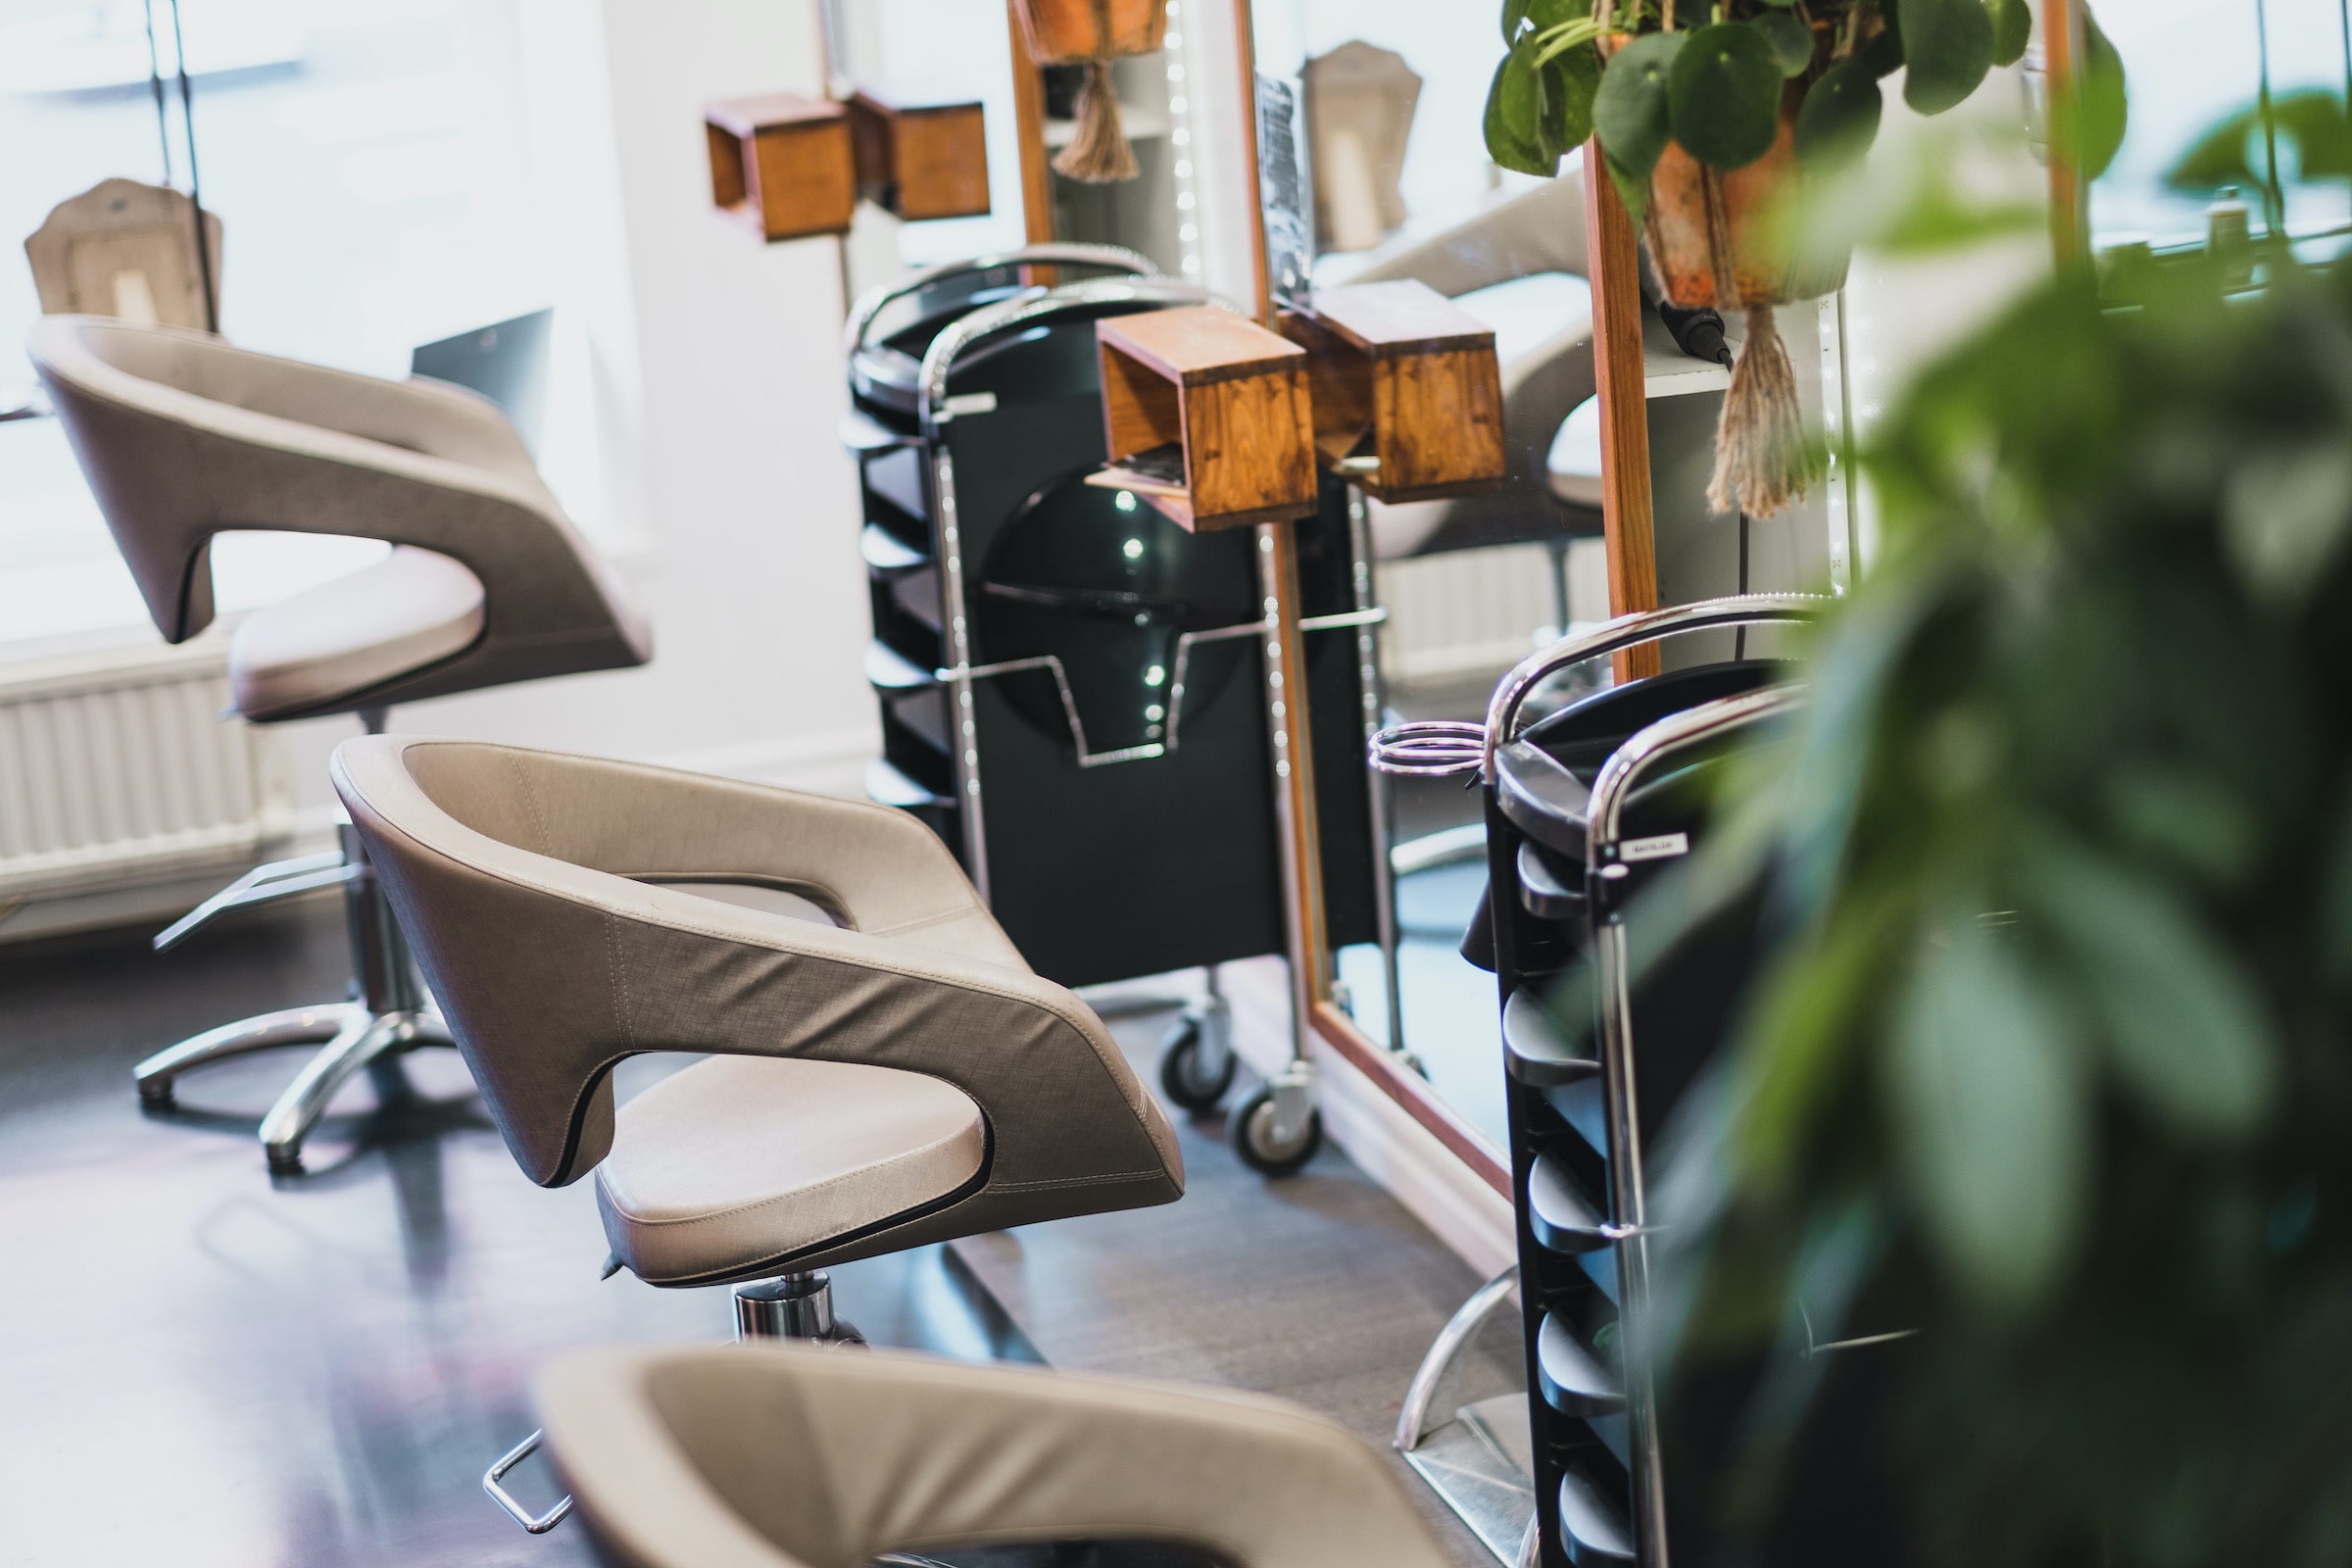 Guide to organic hair salons in London